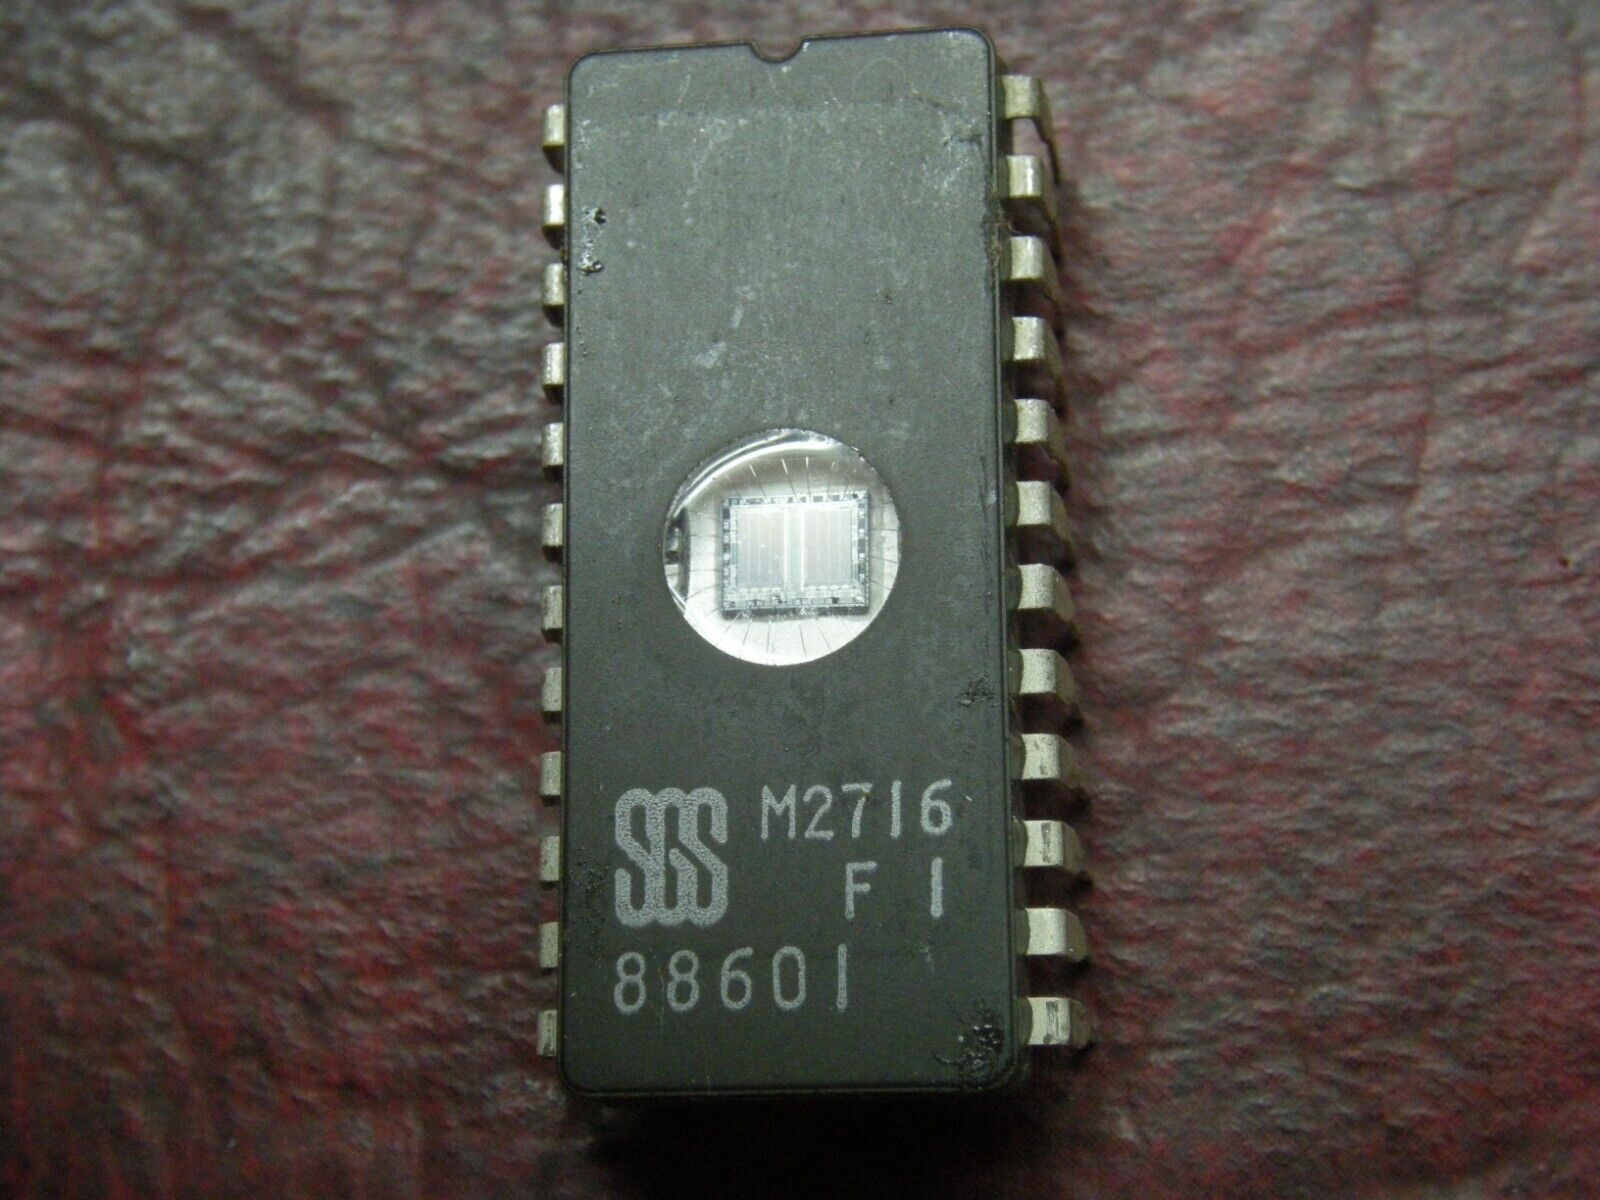 M2716F1 Vintage EPROM by SGS, 24 PIN DIP, These are unused or erased